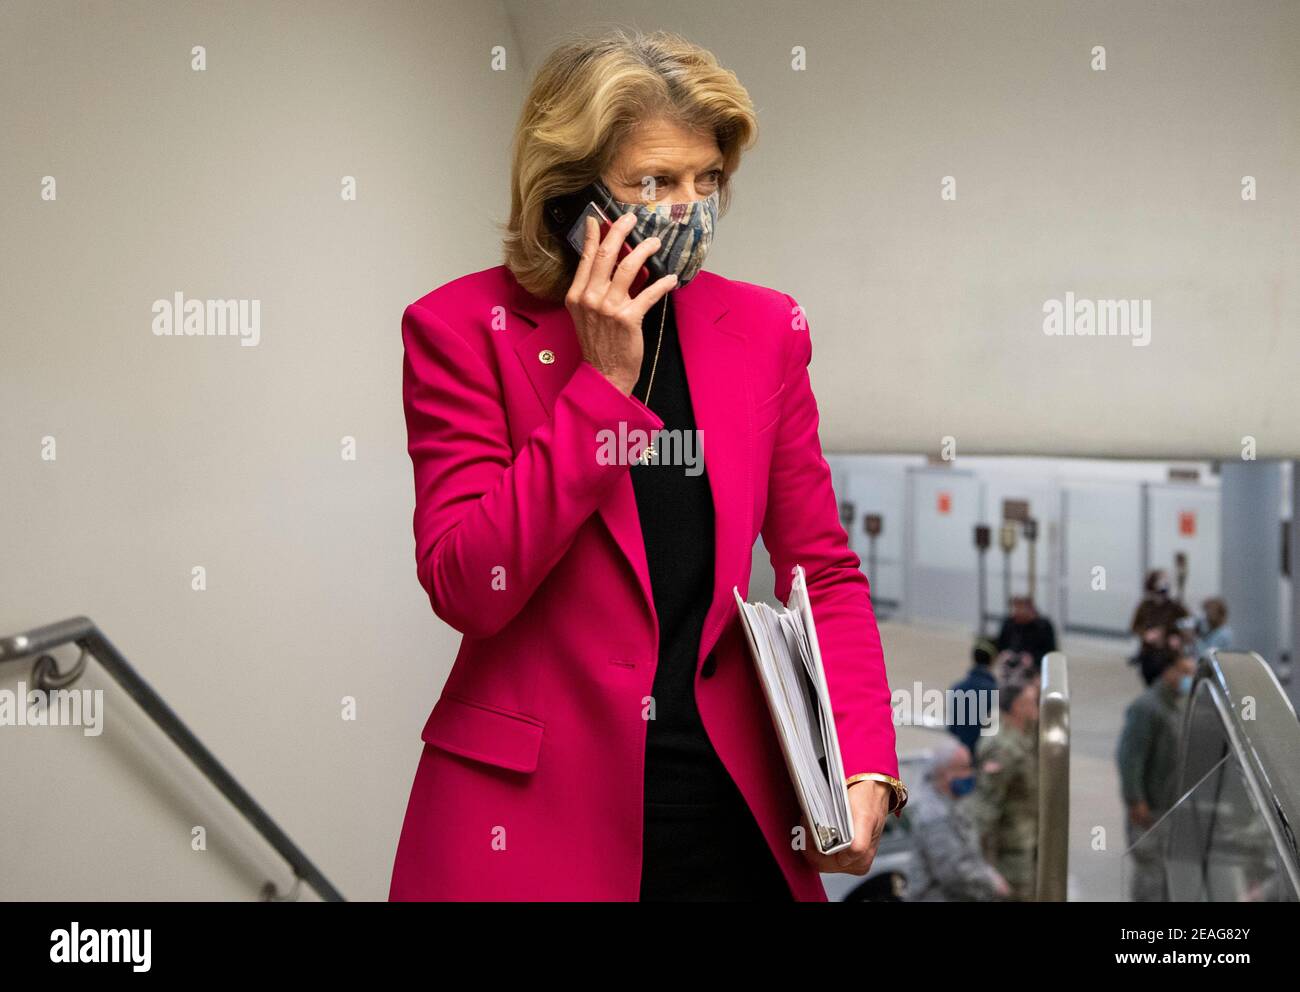 UNITED STATES - February 9: Sen. Lisa Murkowski, R-Alaska, walks through the Senate subway on the first day of former President Donald Trump's second impeachment trial at the U.S. Capitol in Washington on Tuesday, Feb. 9, 2021. Trump is charged with “incitement of insurrection” after his supporters stormed the Capitol in an attempt to overturn November's election result. Credit: Caroline Brehman/Pool via CNP | usage worldwide Stock Photo